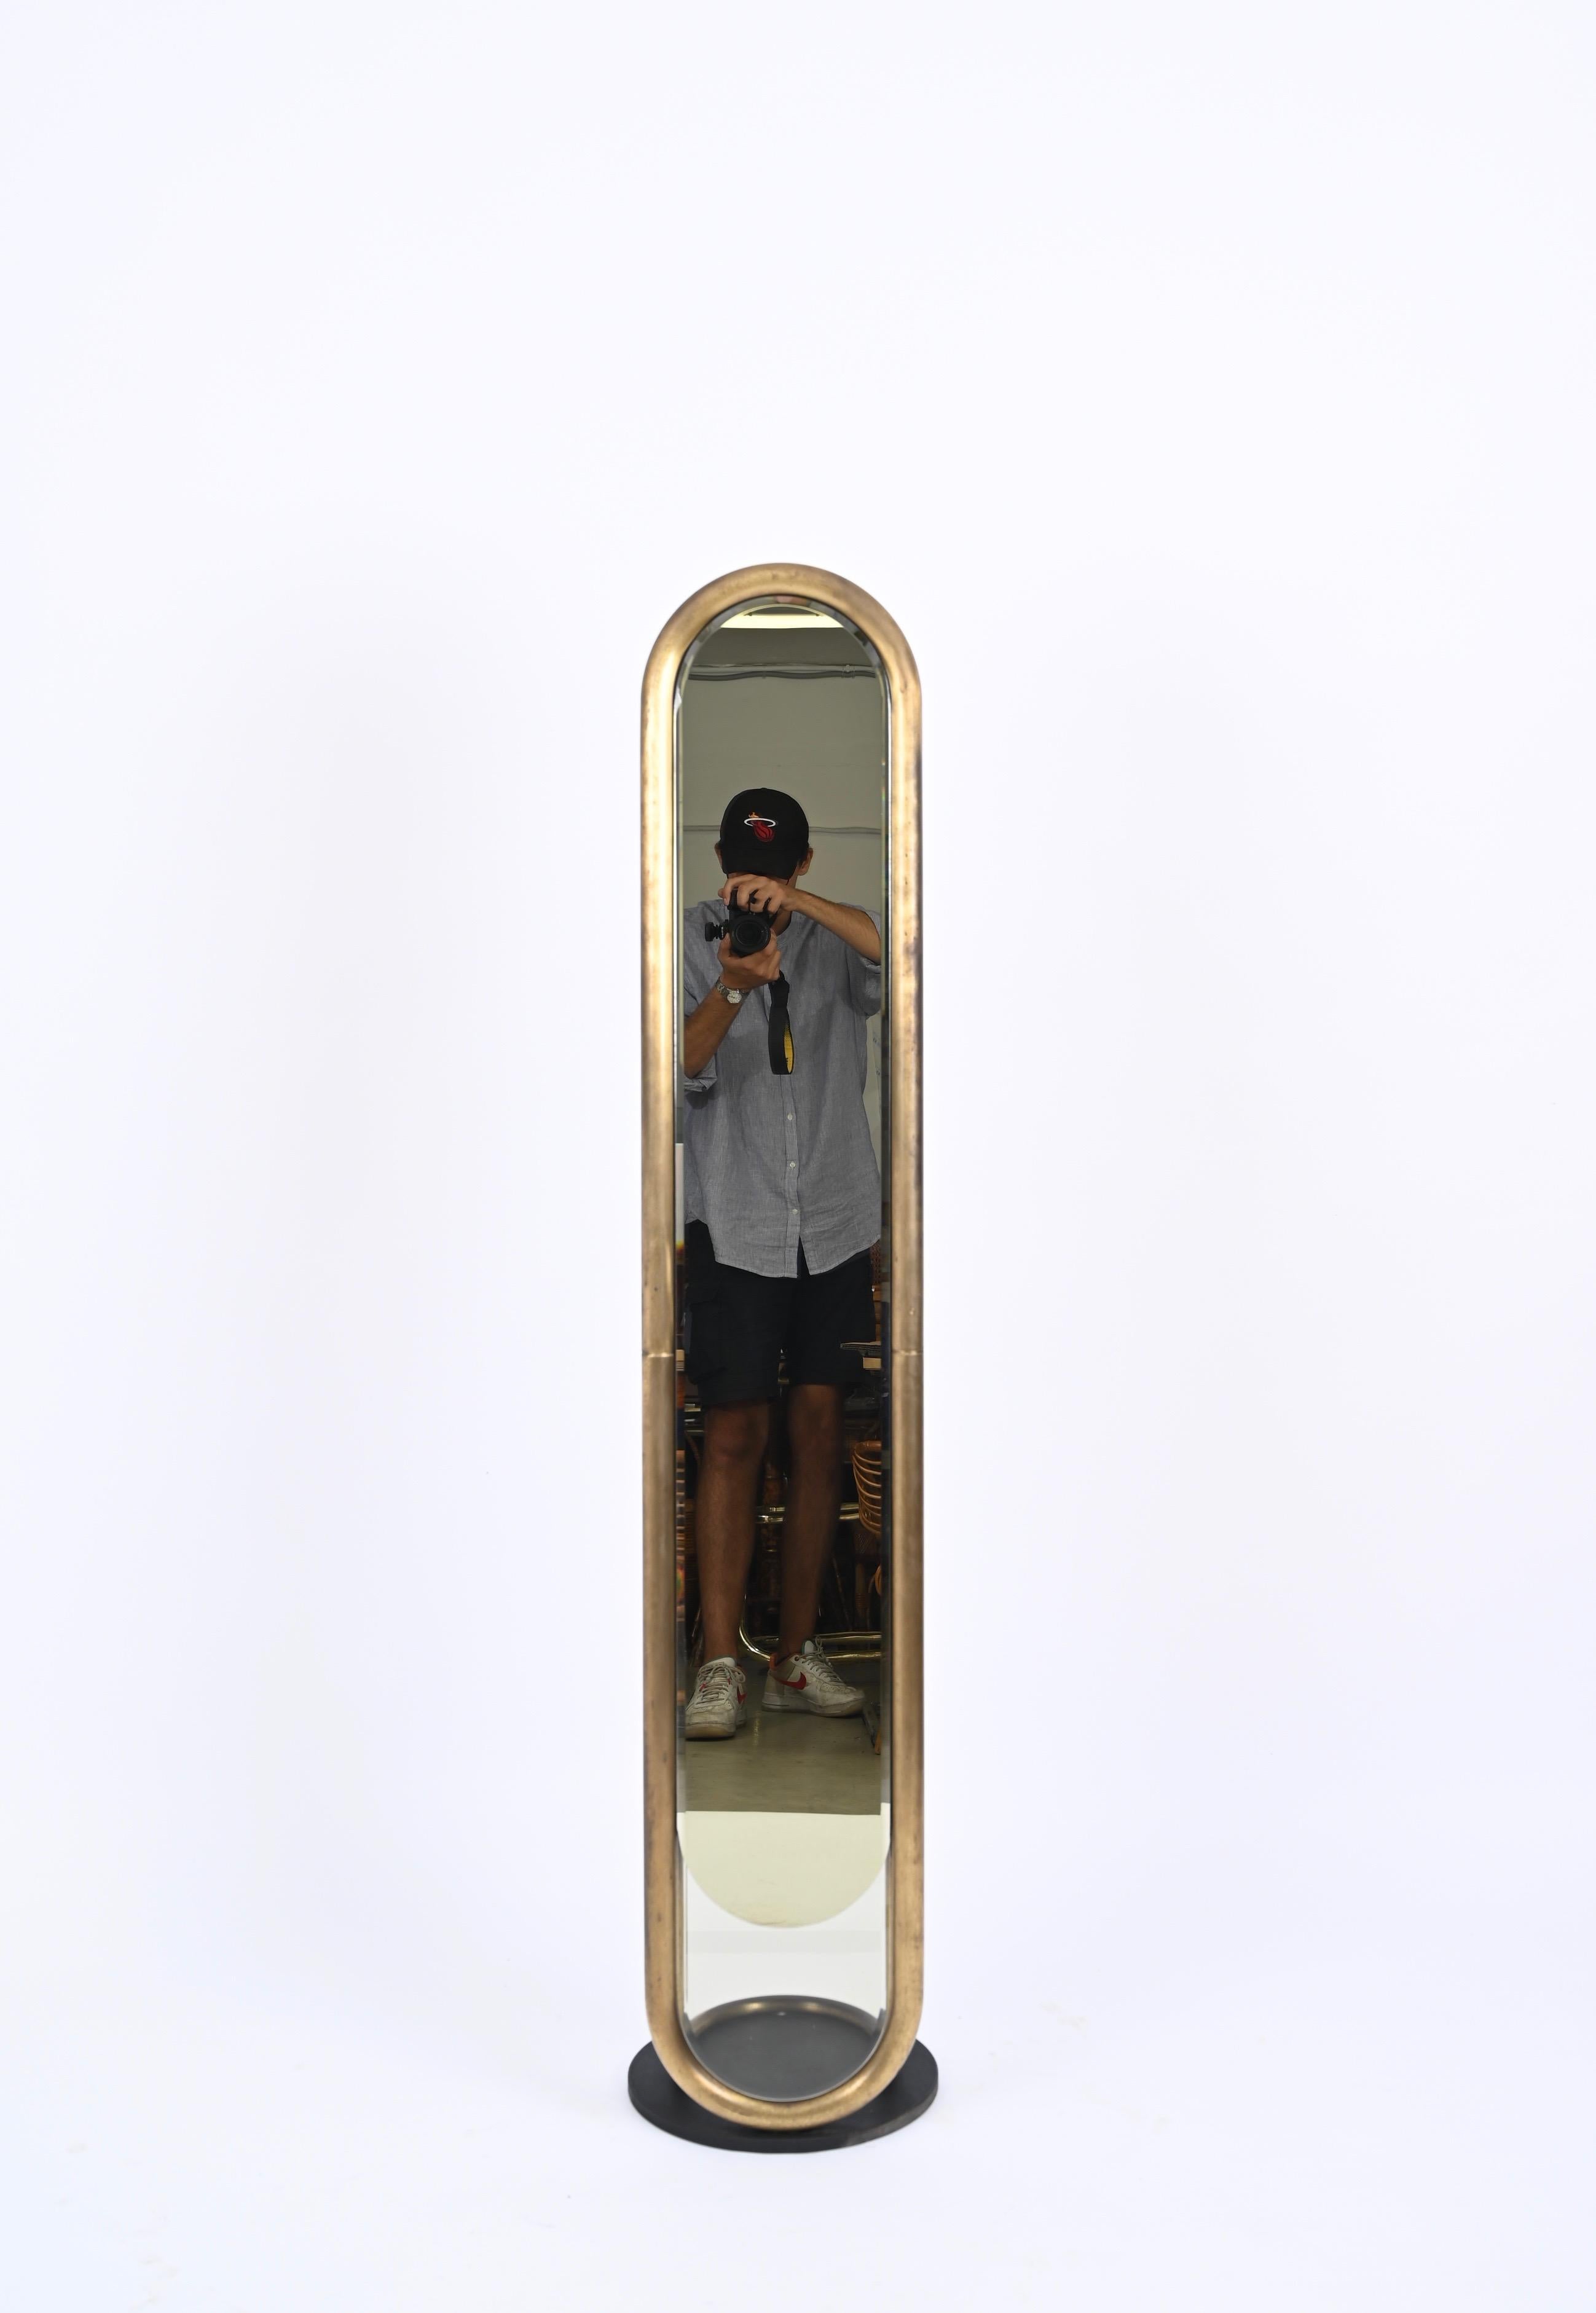 Marvellous floor mirror in solid brass with bronze mirror and black enameled metal base. This unique piece was designed in Italy in the 1970s.

This gorgeous floor standing mirror has a stunning oblong beveled bronze mirror that ends on the bottom